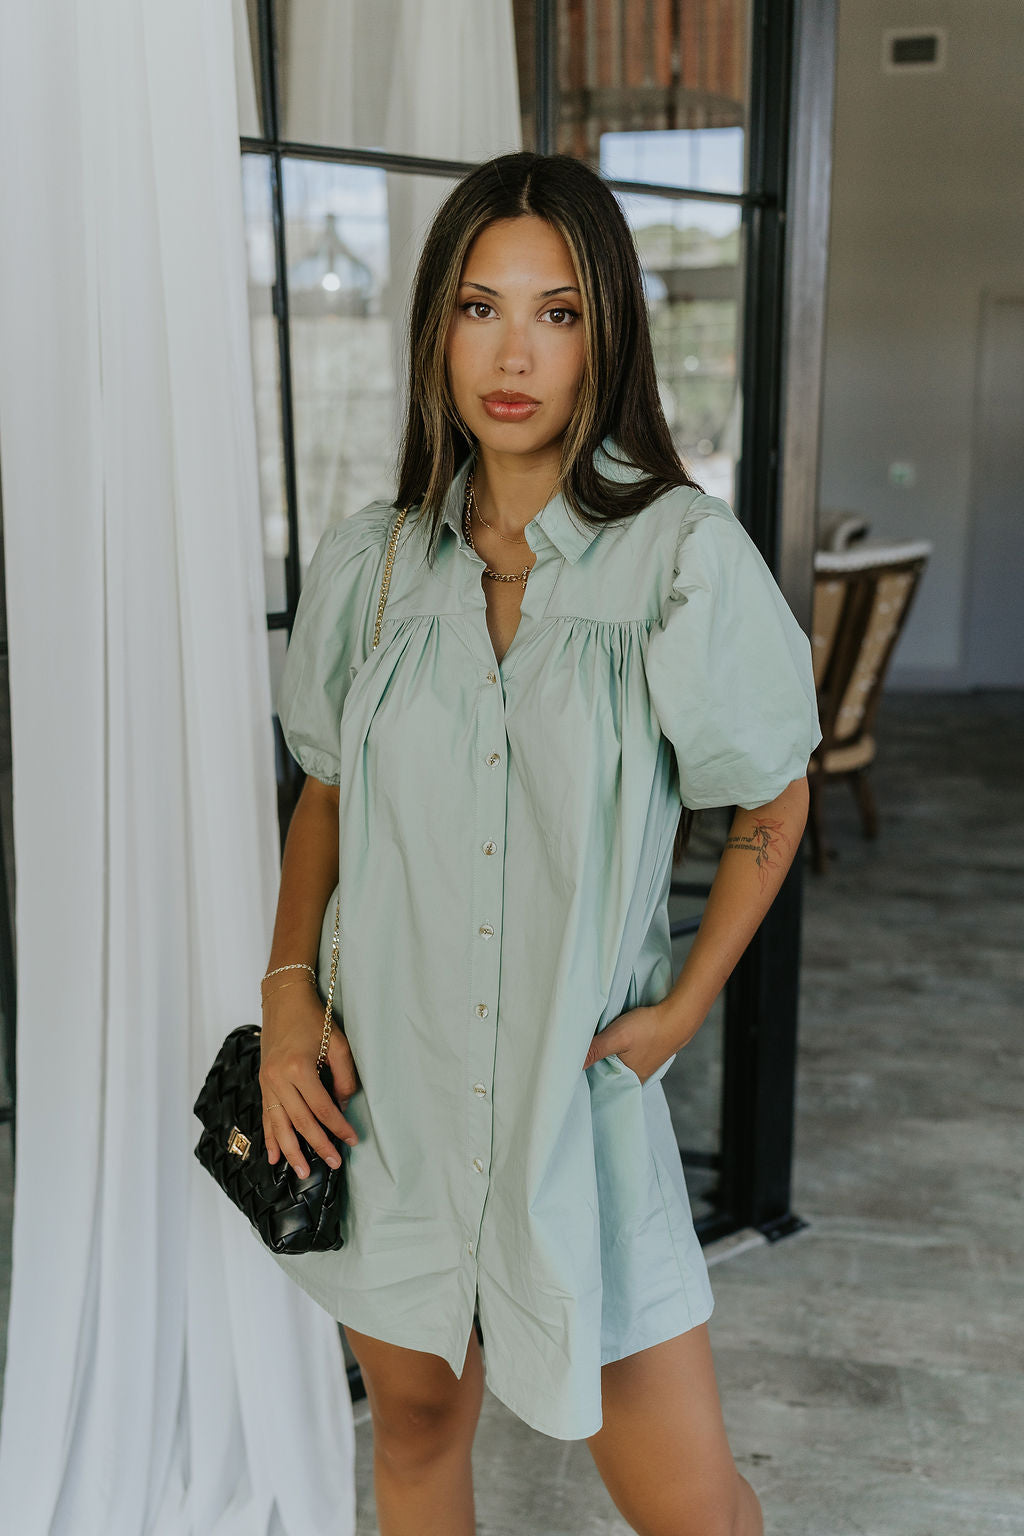 front view of model wearing the Marianna Sage Short Sleeve Dress that has sage green fabric, a button-up front, collar, and short puff sleeves.